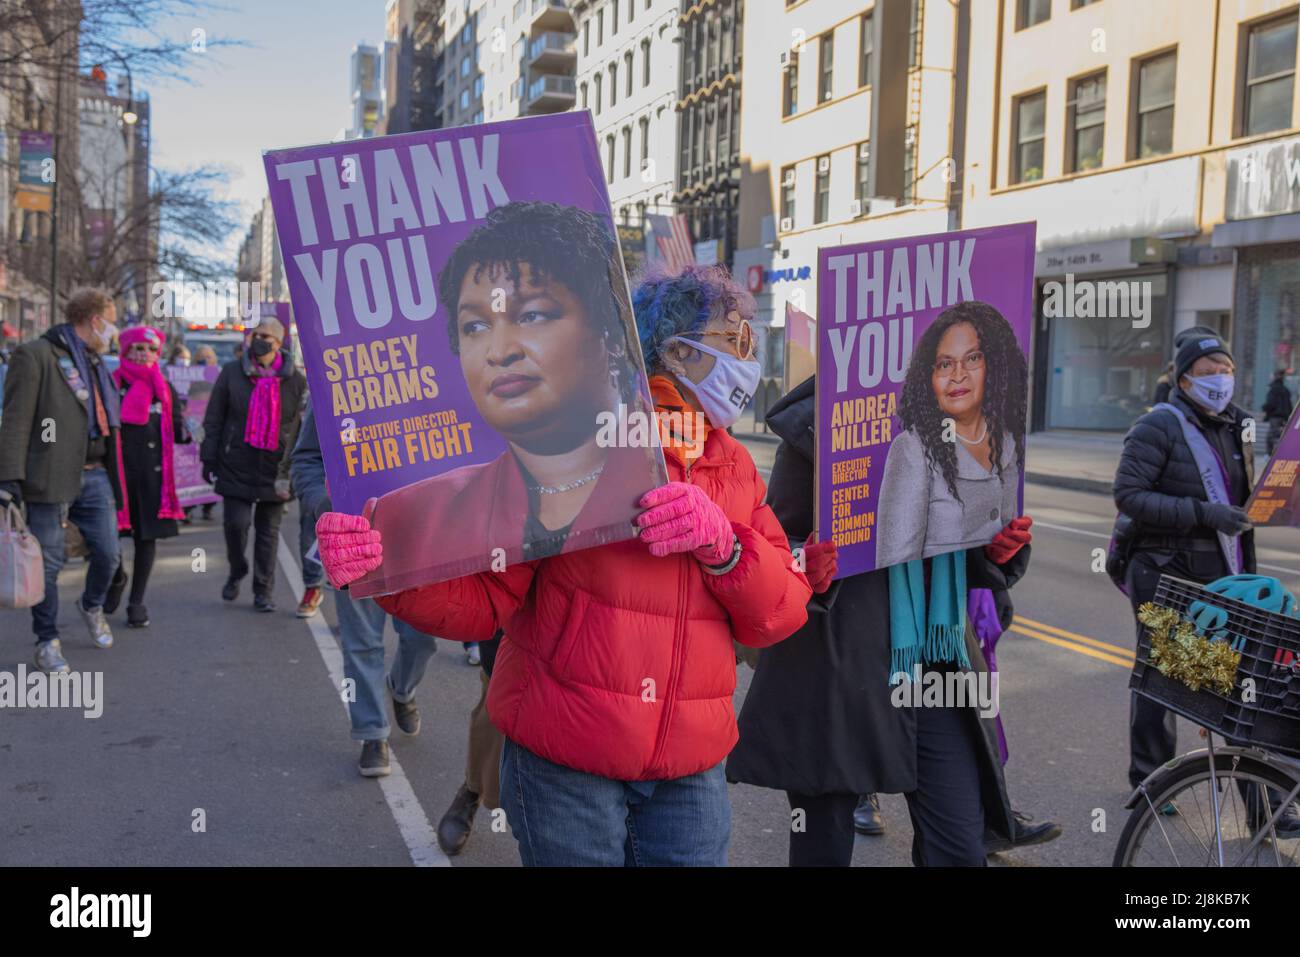 NEW YORK, N.Y. – March 7, 2021: Demonstrators carry signs thanking Stacey Abrams and Andrea Miller at a rally in support of the Equal Rights Amendment. Stock Photo